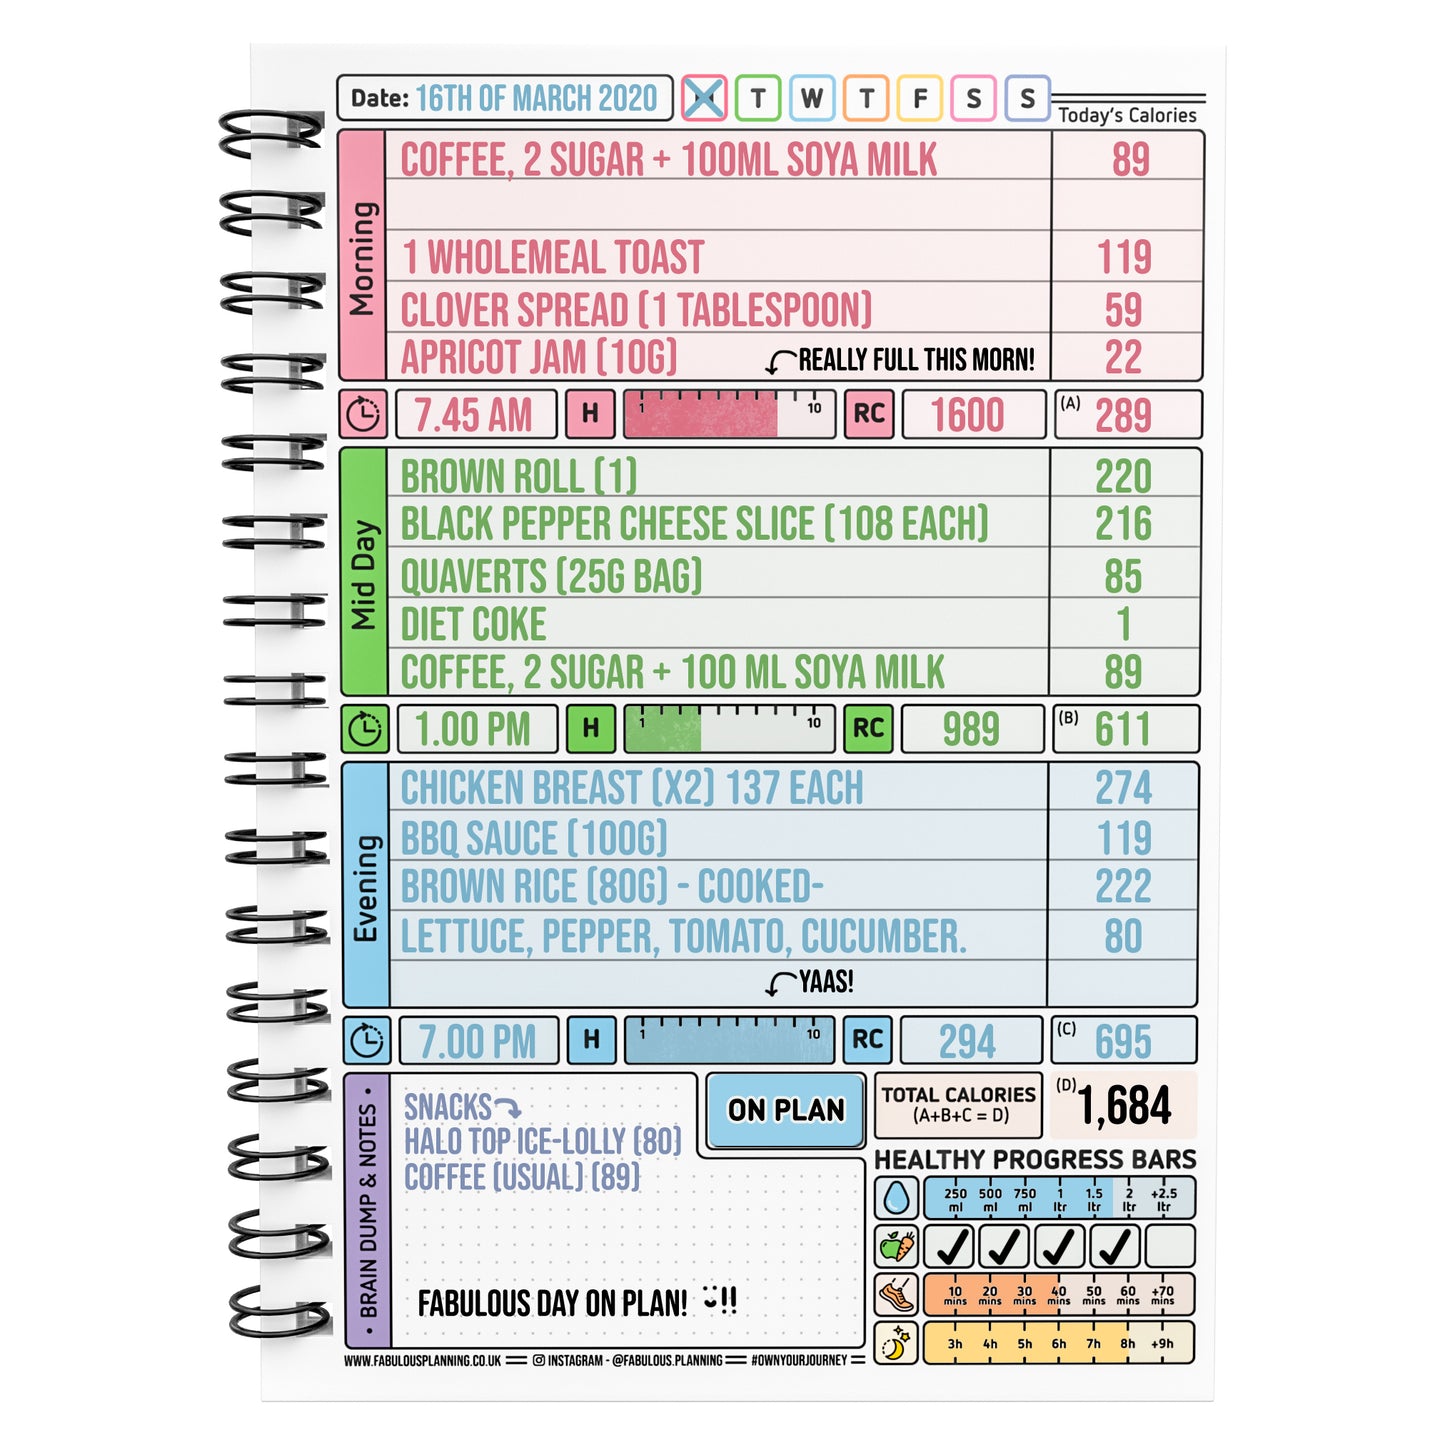 Food Diary - C38 - Calorie Counting